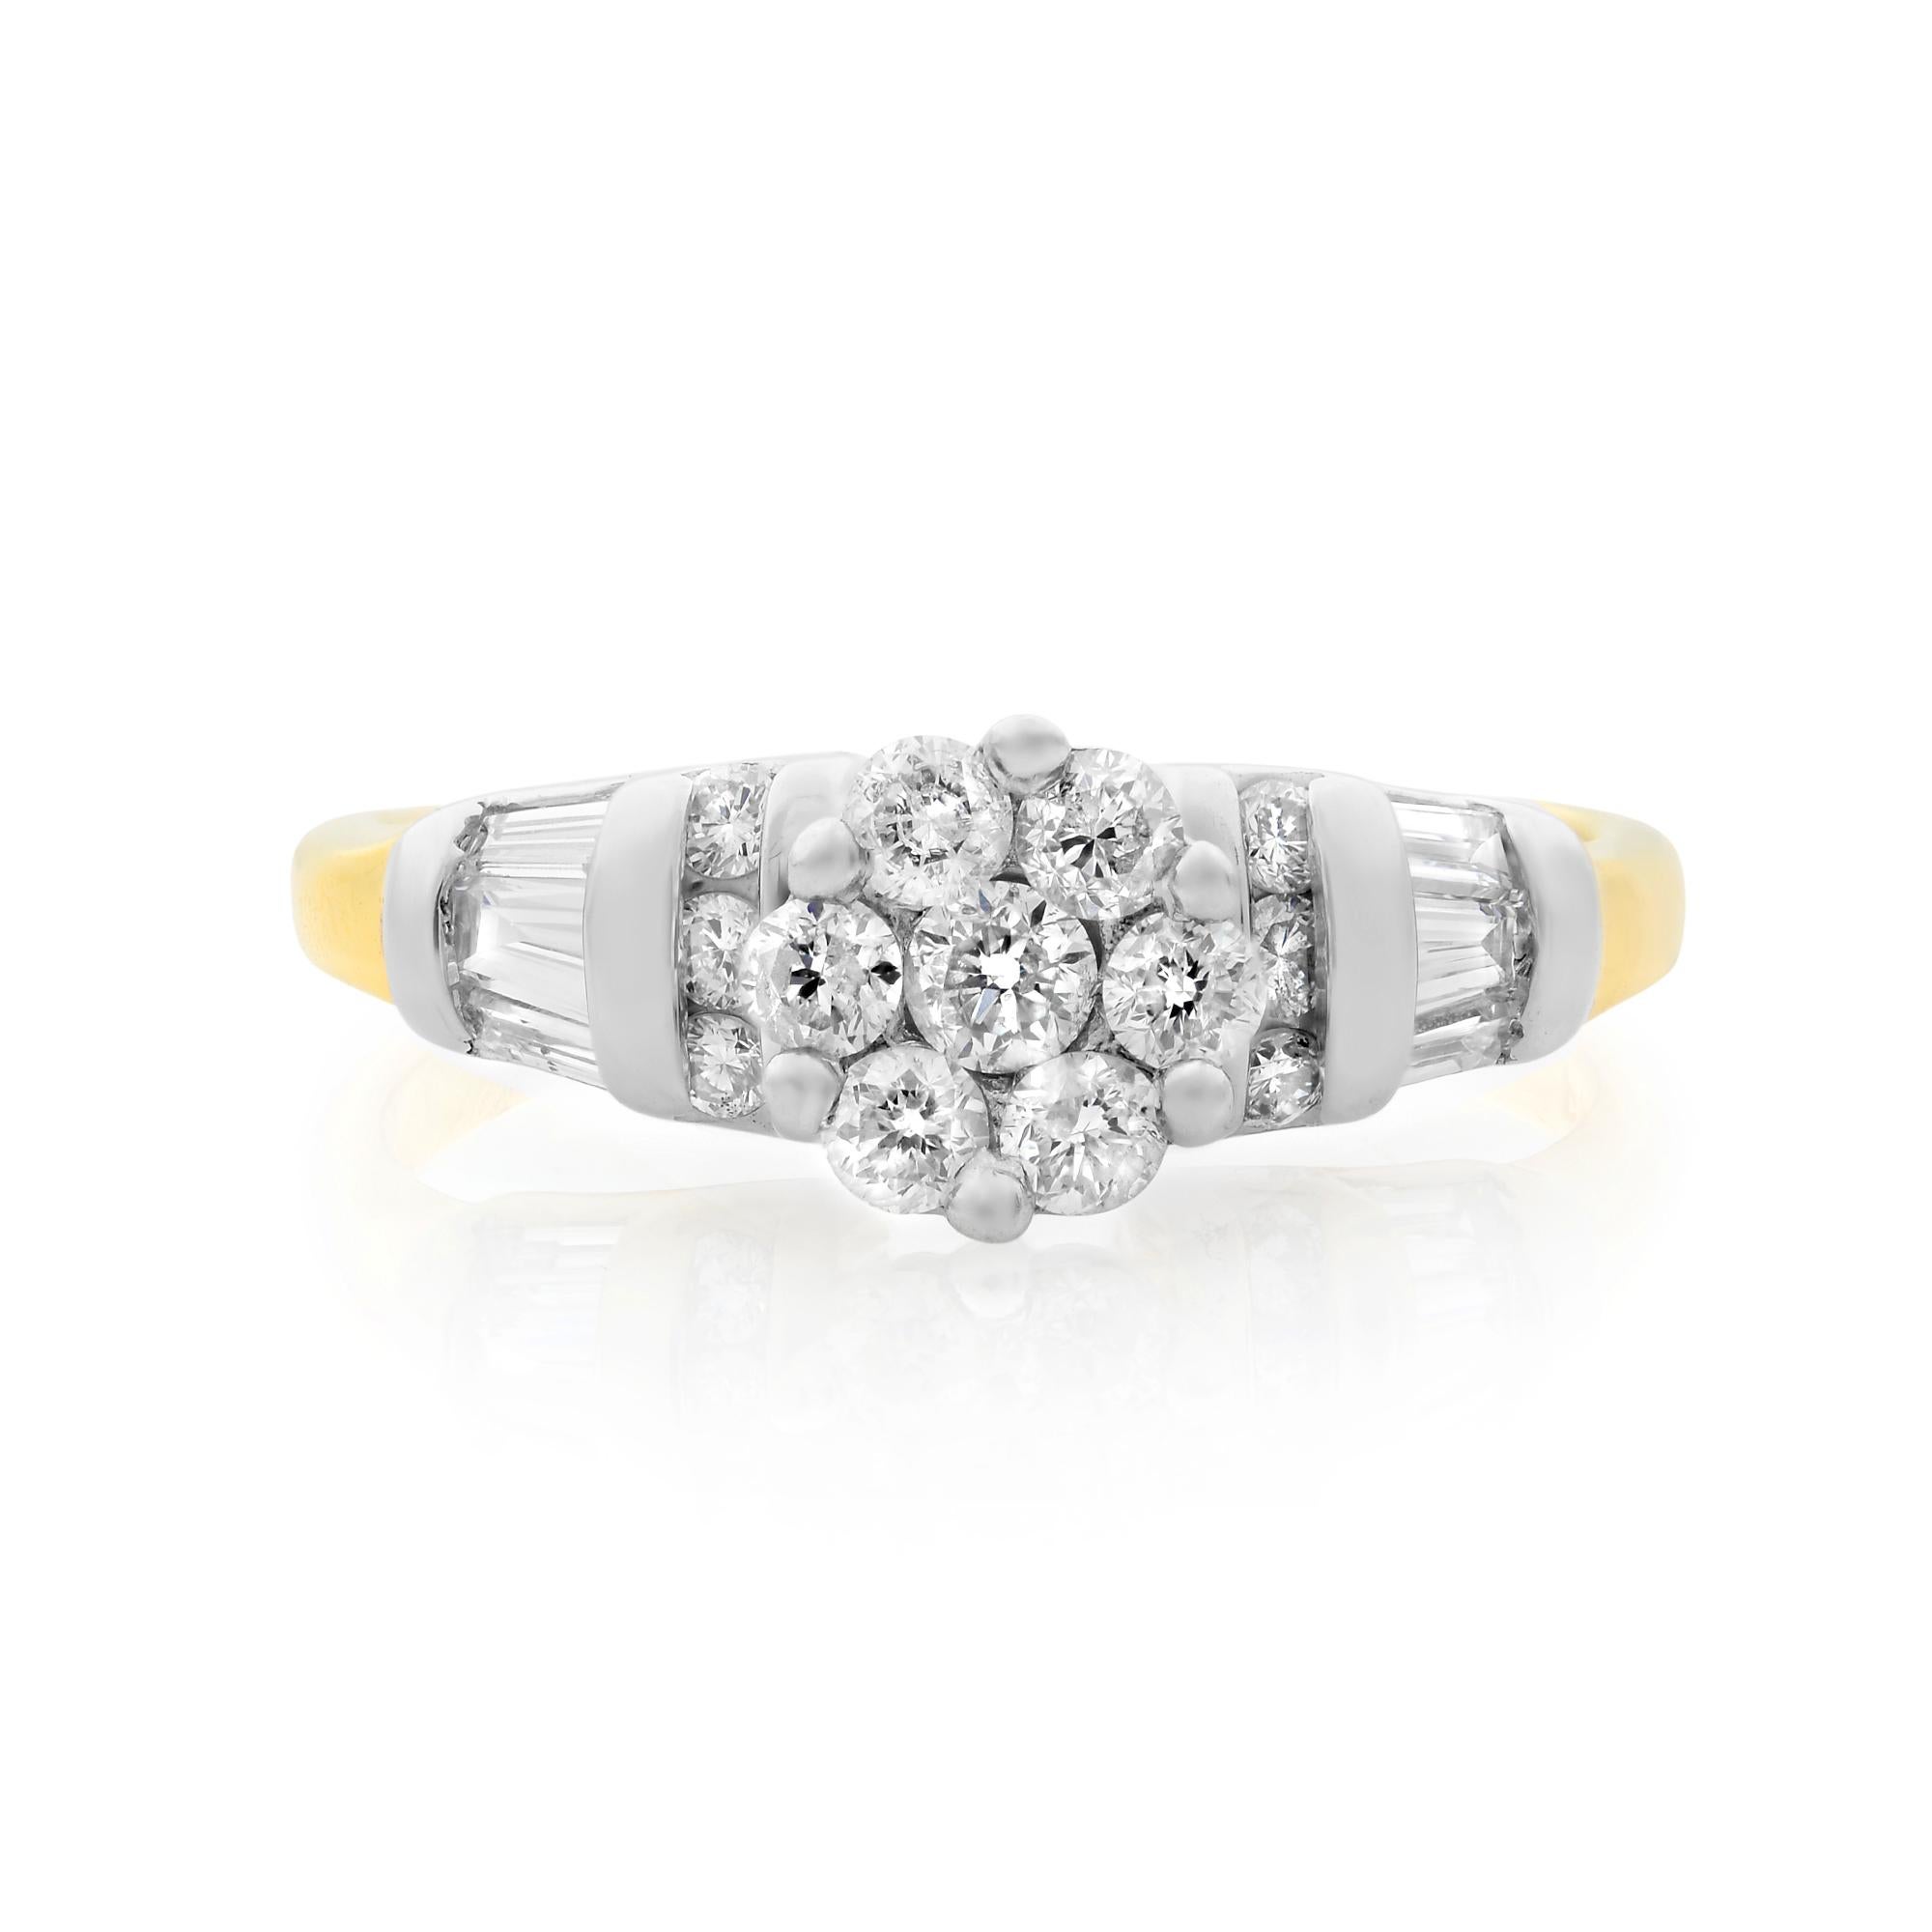 This beautiful ladies wedding ring is encrusted with 0.25cttw of dazzling round and baguette cut diamonds crafted in 14K white and yellow gold. Ring size 7. Total weight: 3.20 gms. Comes with a presentable gift box. 
